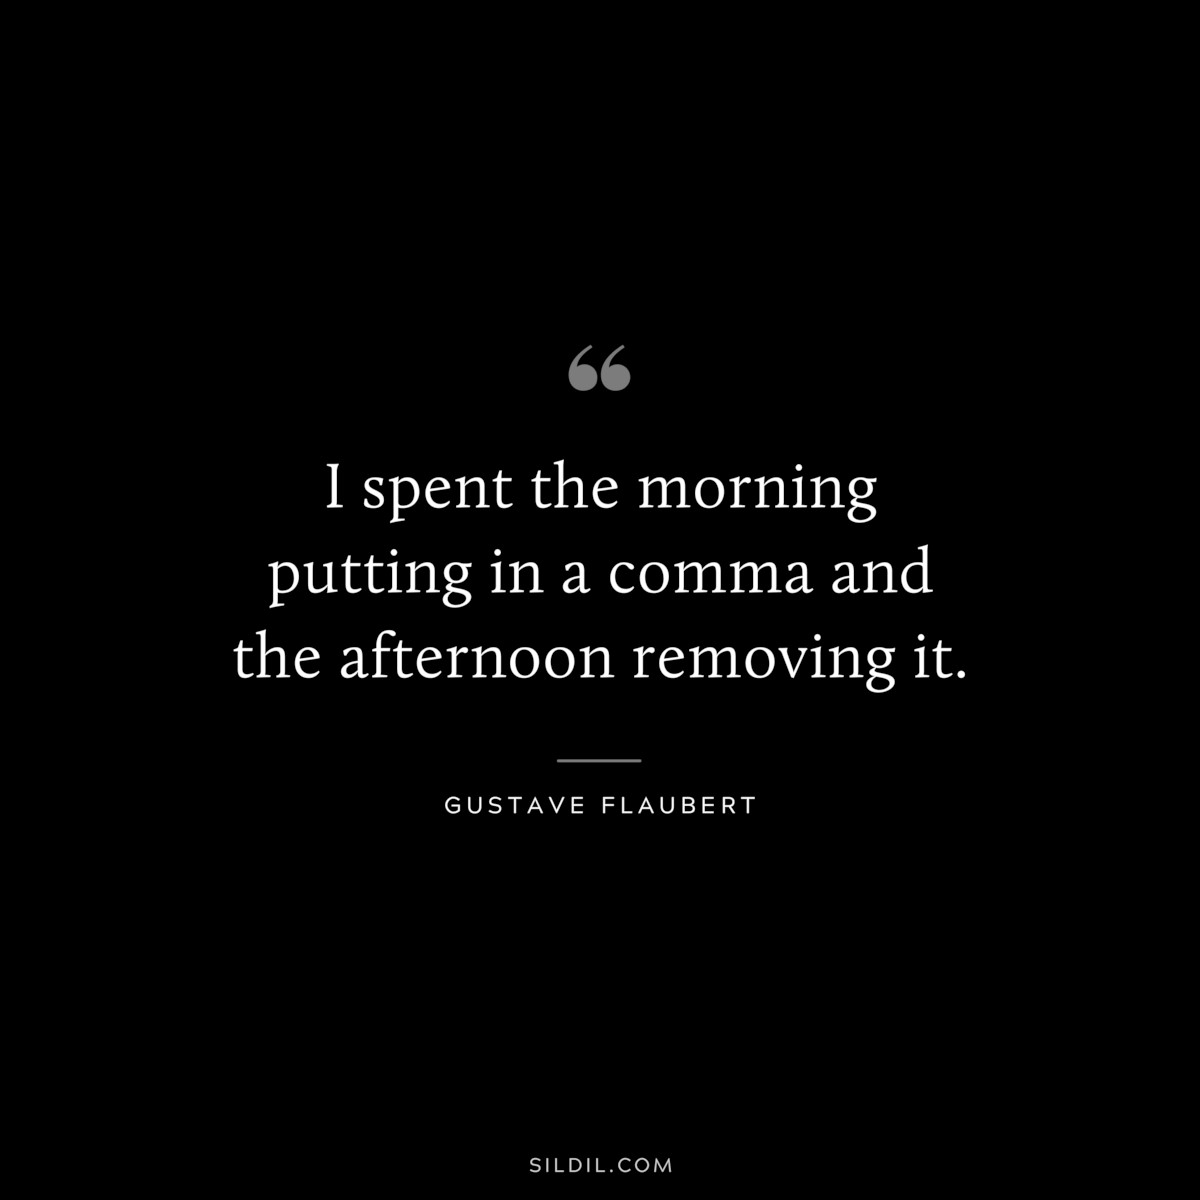 I spent the morning putting in a comma and the afternoon removing it. ― Gustave Flaubert